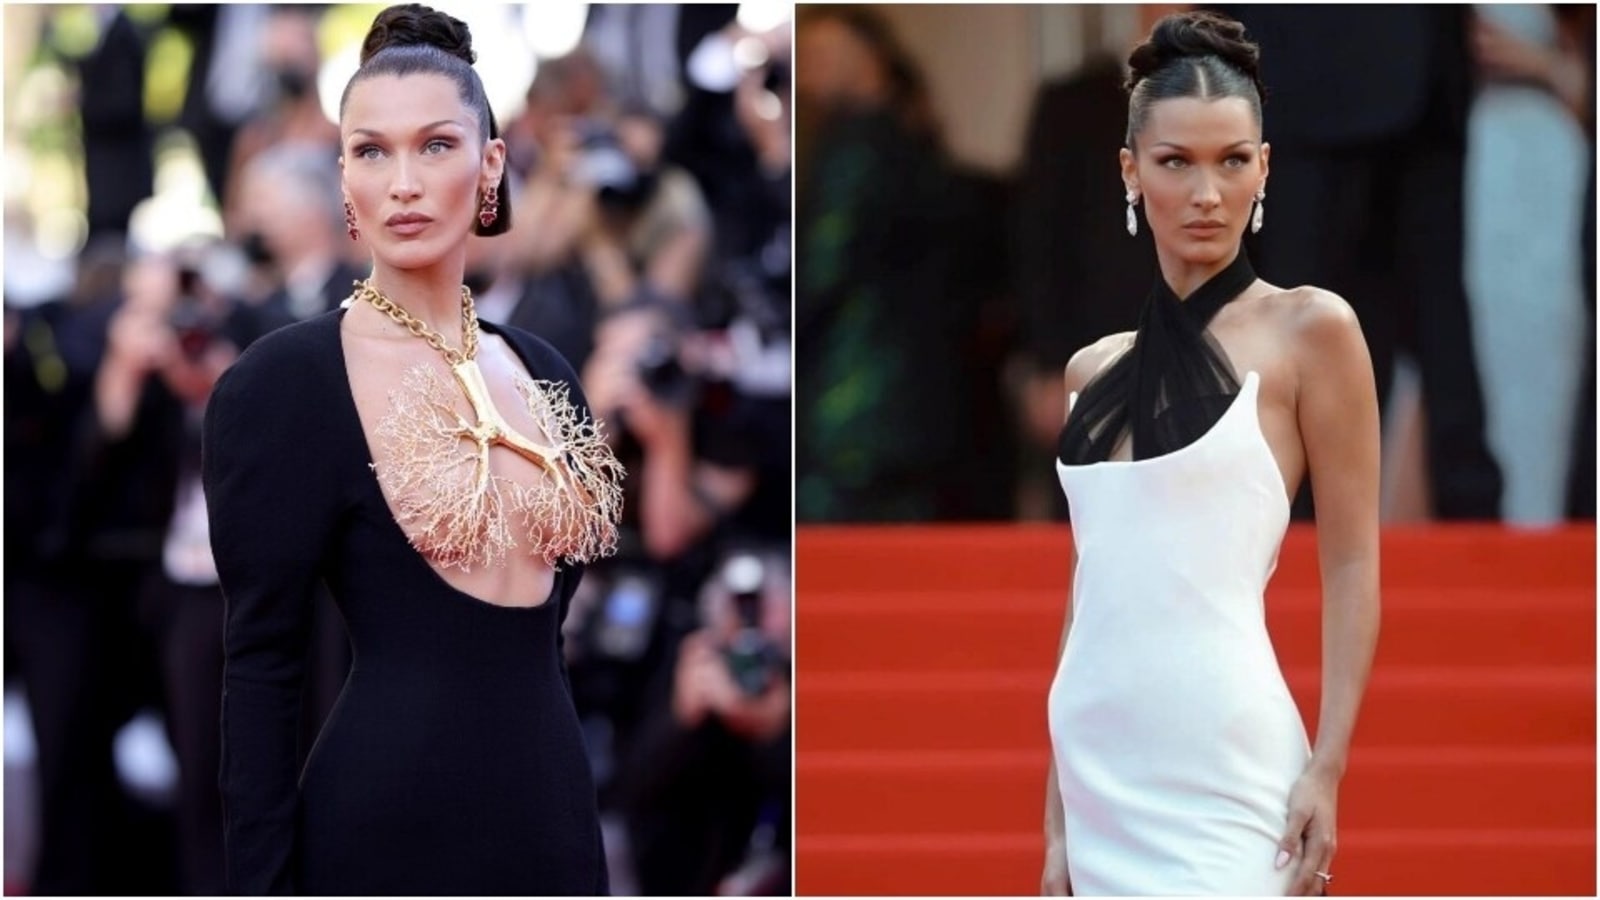 Bella Hadid Makes Quite The Entrance at Cannes Film Festival 2021: Photo  1316206, 2021 Cannes Film Festival, Bella Hadid Pictures